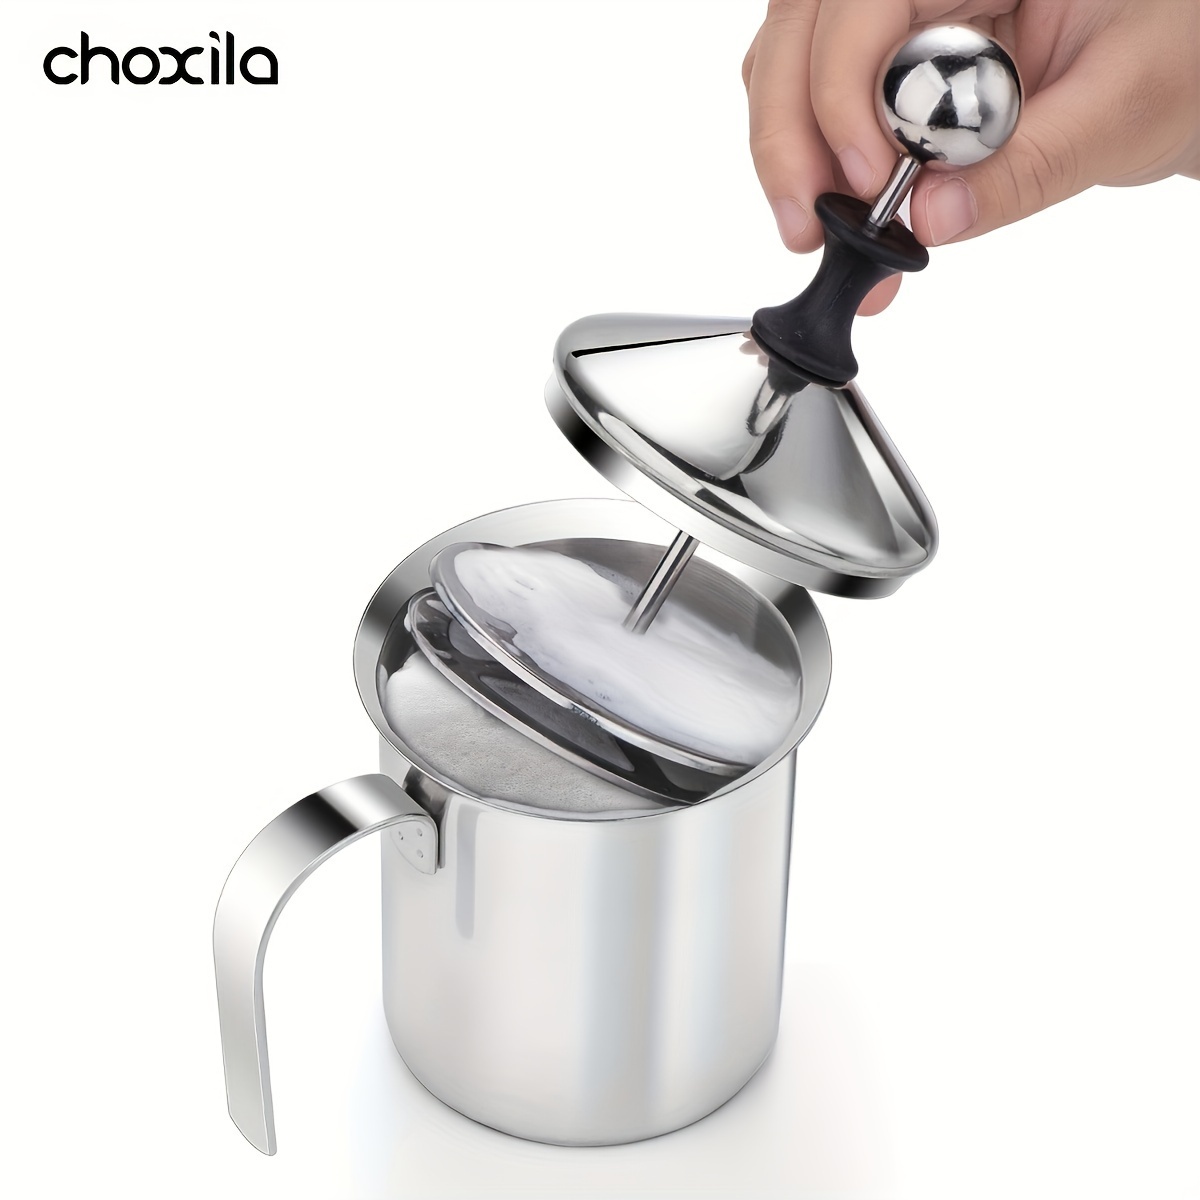 

Stainless Steel Milk Frothing Pitcher For Espresso Art - Manual Coffee Frother Cup, Kitchen & Cafe Essential